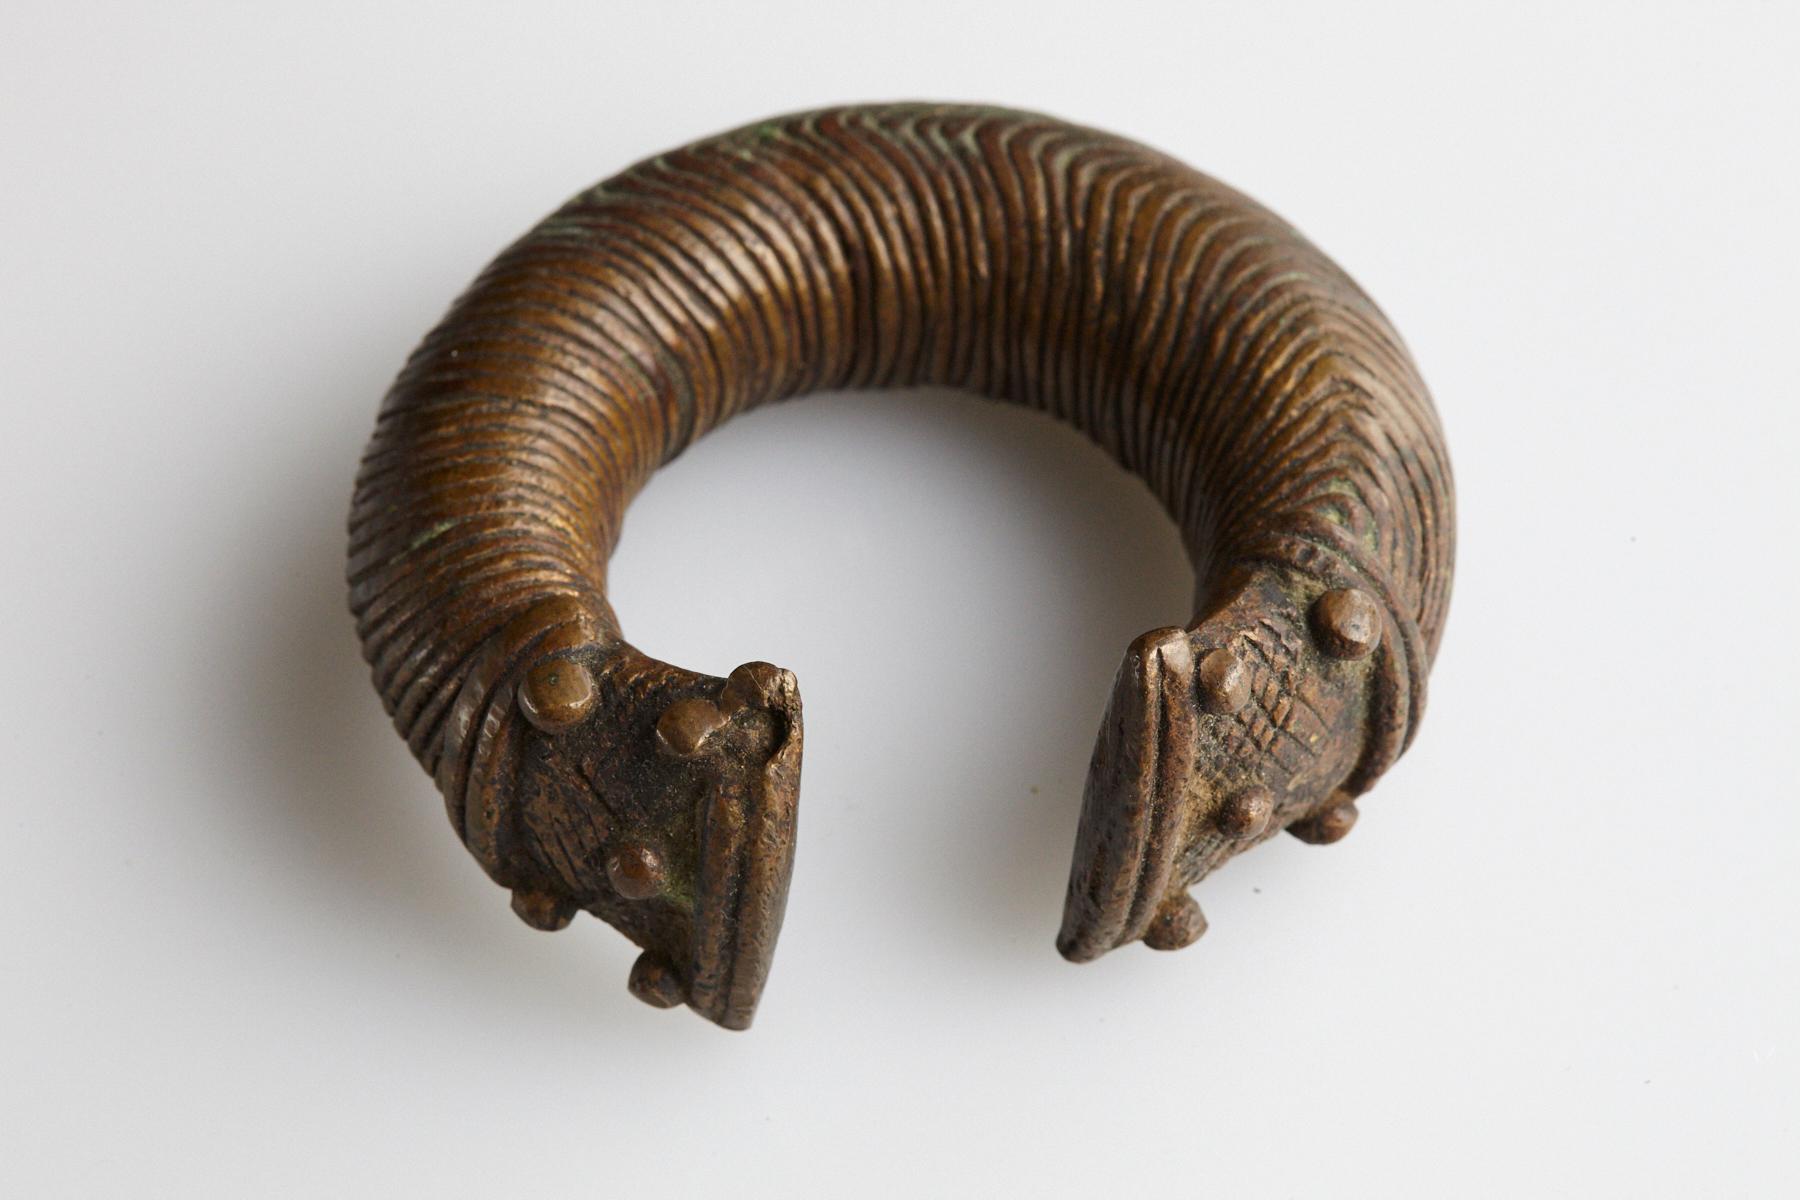 19th-century bronze currency bracelet / Manilla in horseshoe form with fixed opening. Intricate graphical swirl design and tips are shaped with large flat ends with 5 beads on each side. This type of bracelet was worn by the Baoule and Dogon People,